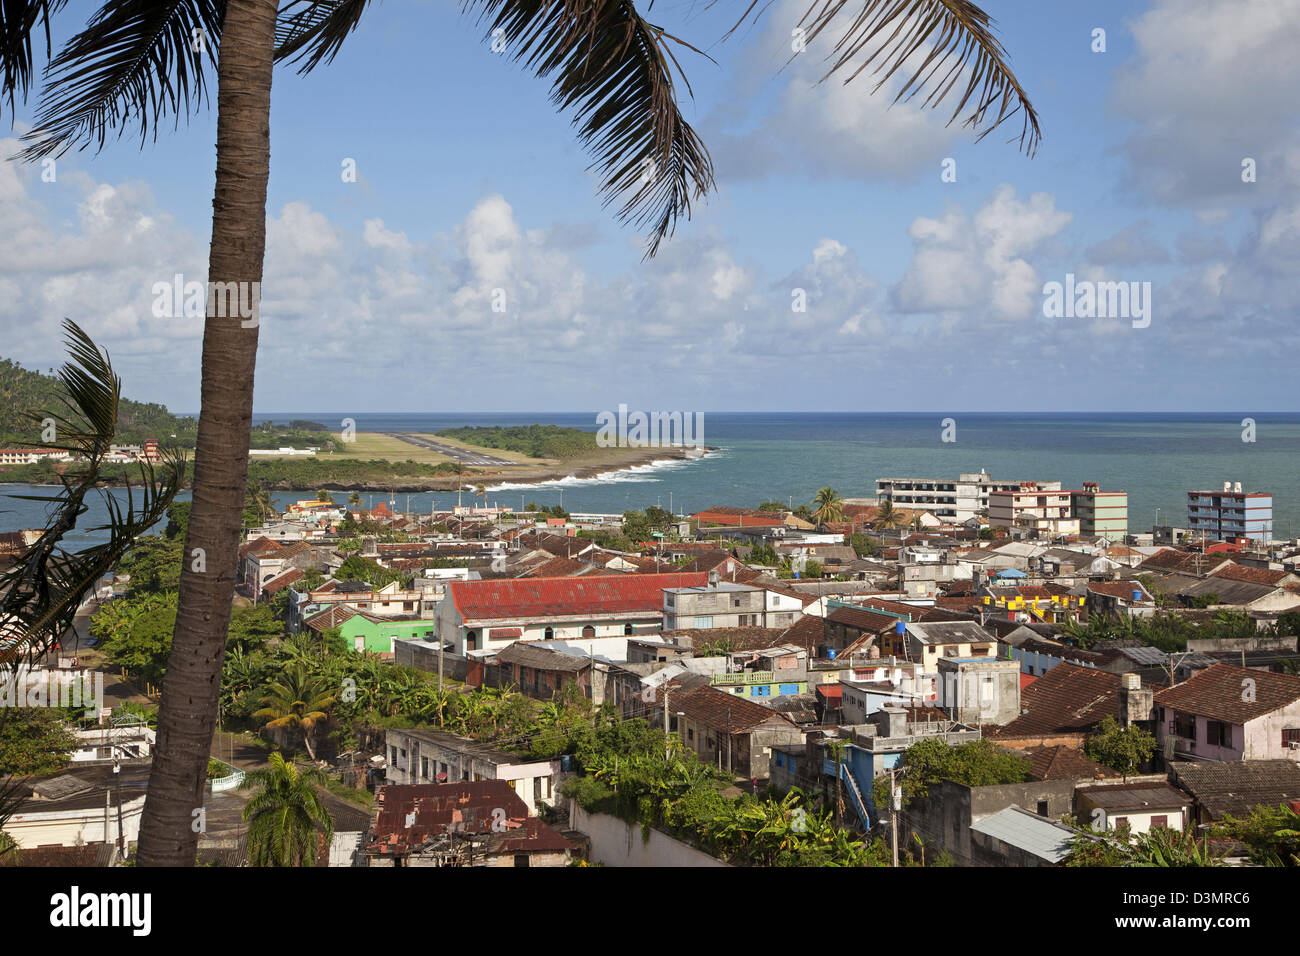 View over the city Baracoa with its apartments in Sovjet style and the Bay of Honey / Bahía de Miel, Guantánamo Province, Cuba Stock Photo